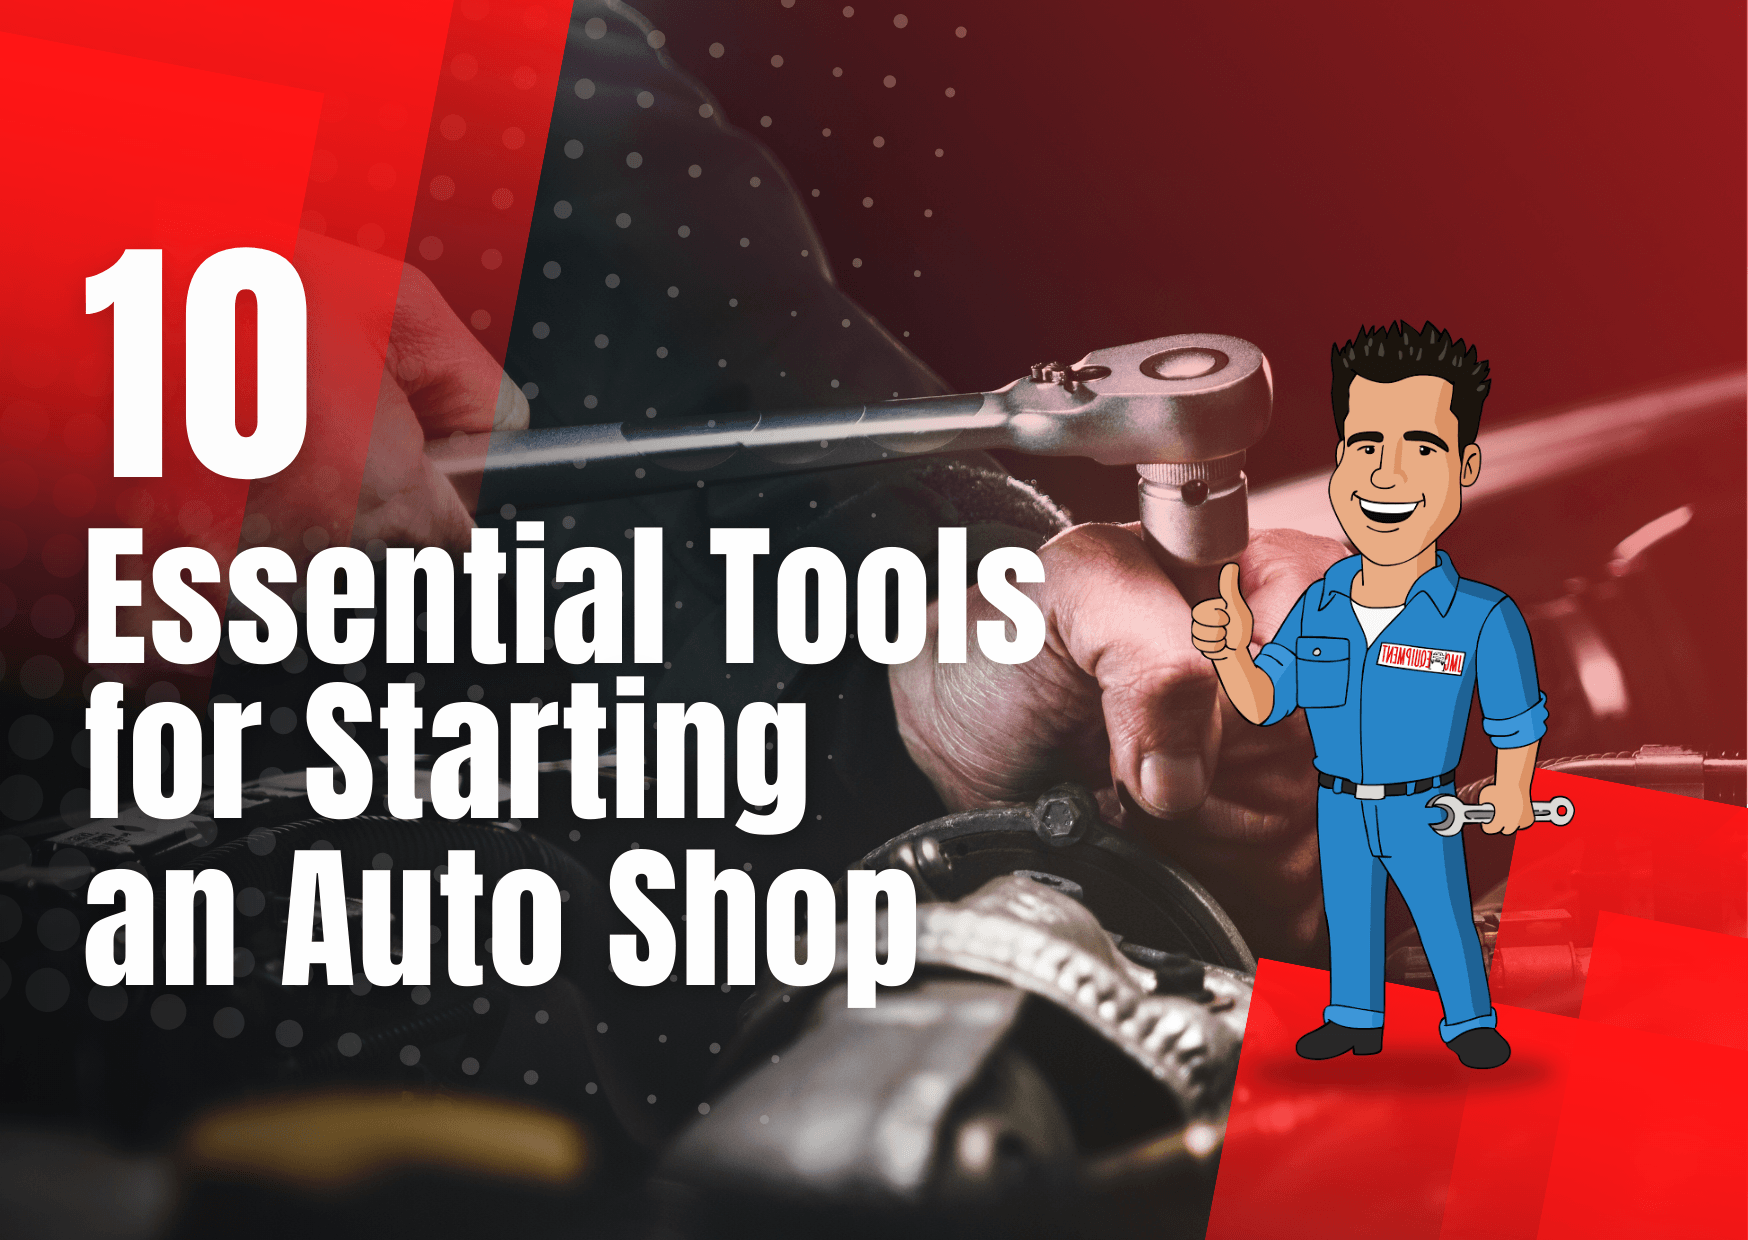 Ten Essential Tools and Equipment for Starting an Auto Shop - JMC